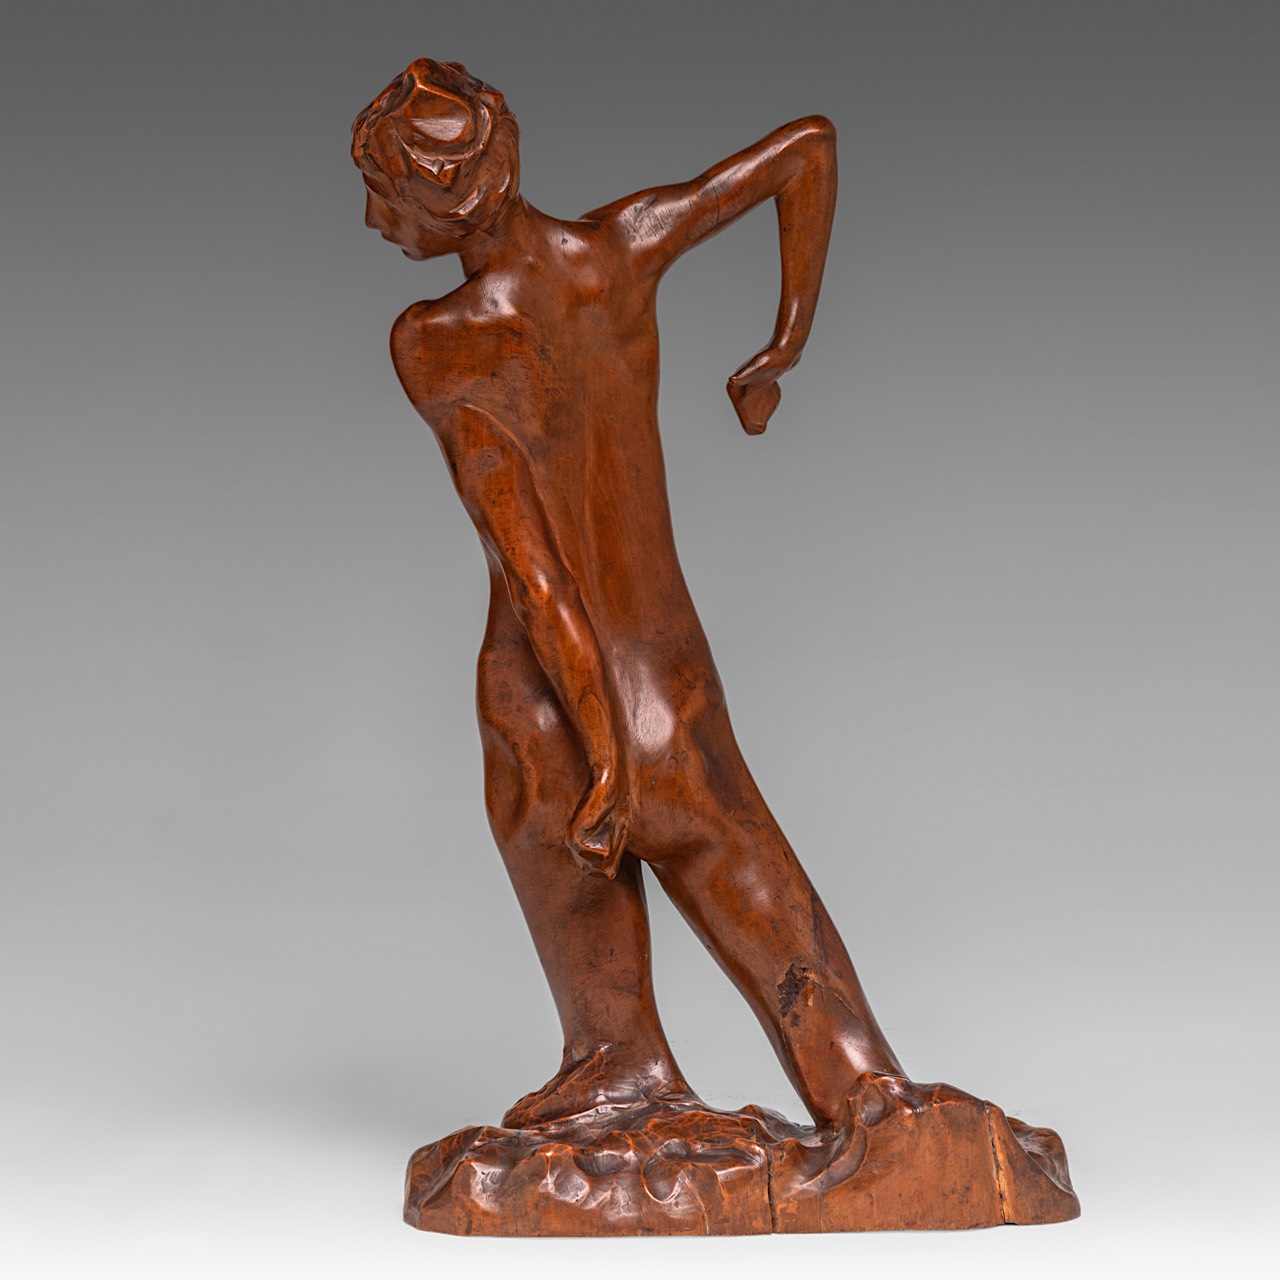 George Minne (1866-1941), 'Baigneuse I', carved wood, H 40 cm - Image 5 of 10